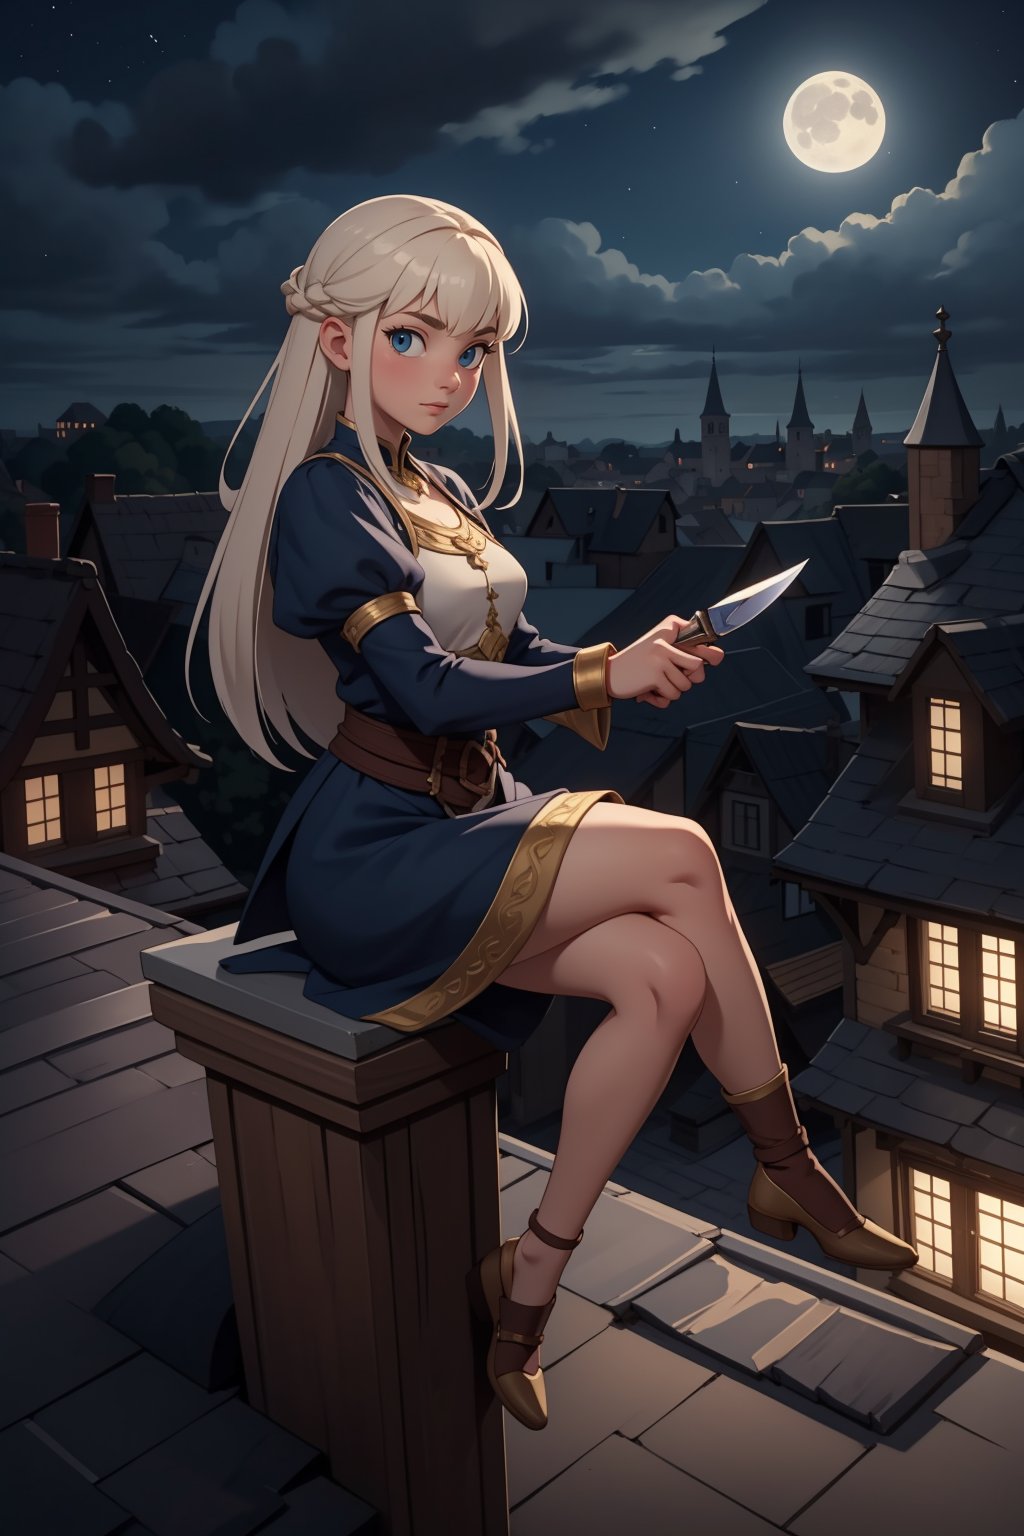 (masterpiece, best quality:1.2), A cunning and mysterious girl in a moonlit medieval town, perched on a rooftop with a dagger in hand.